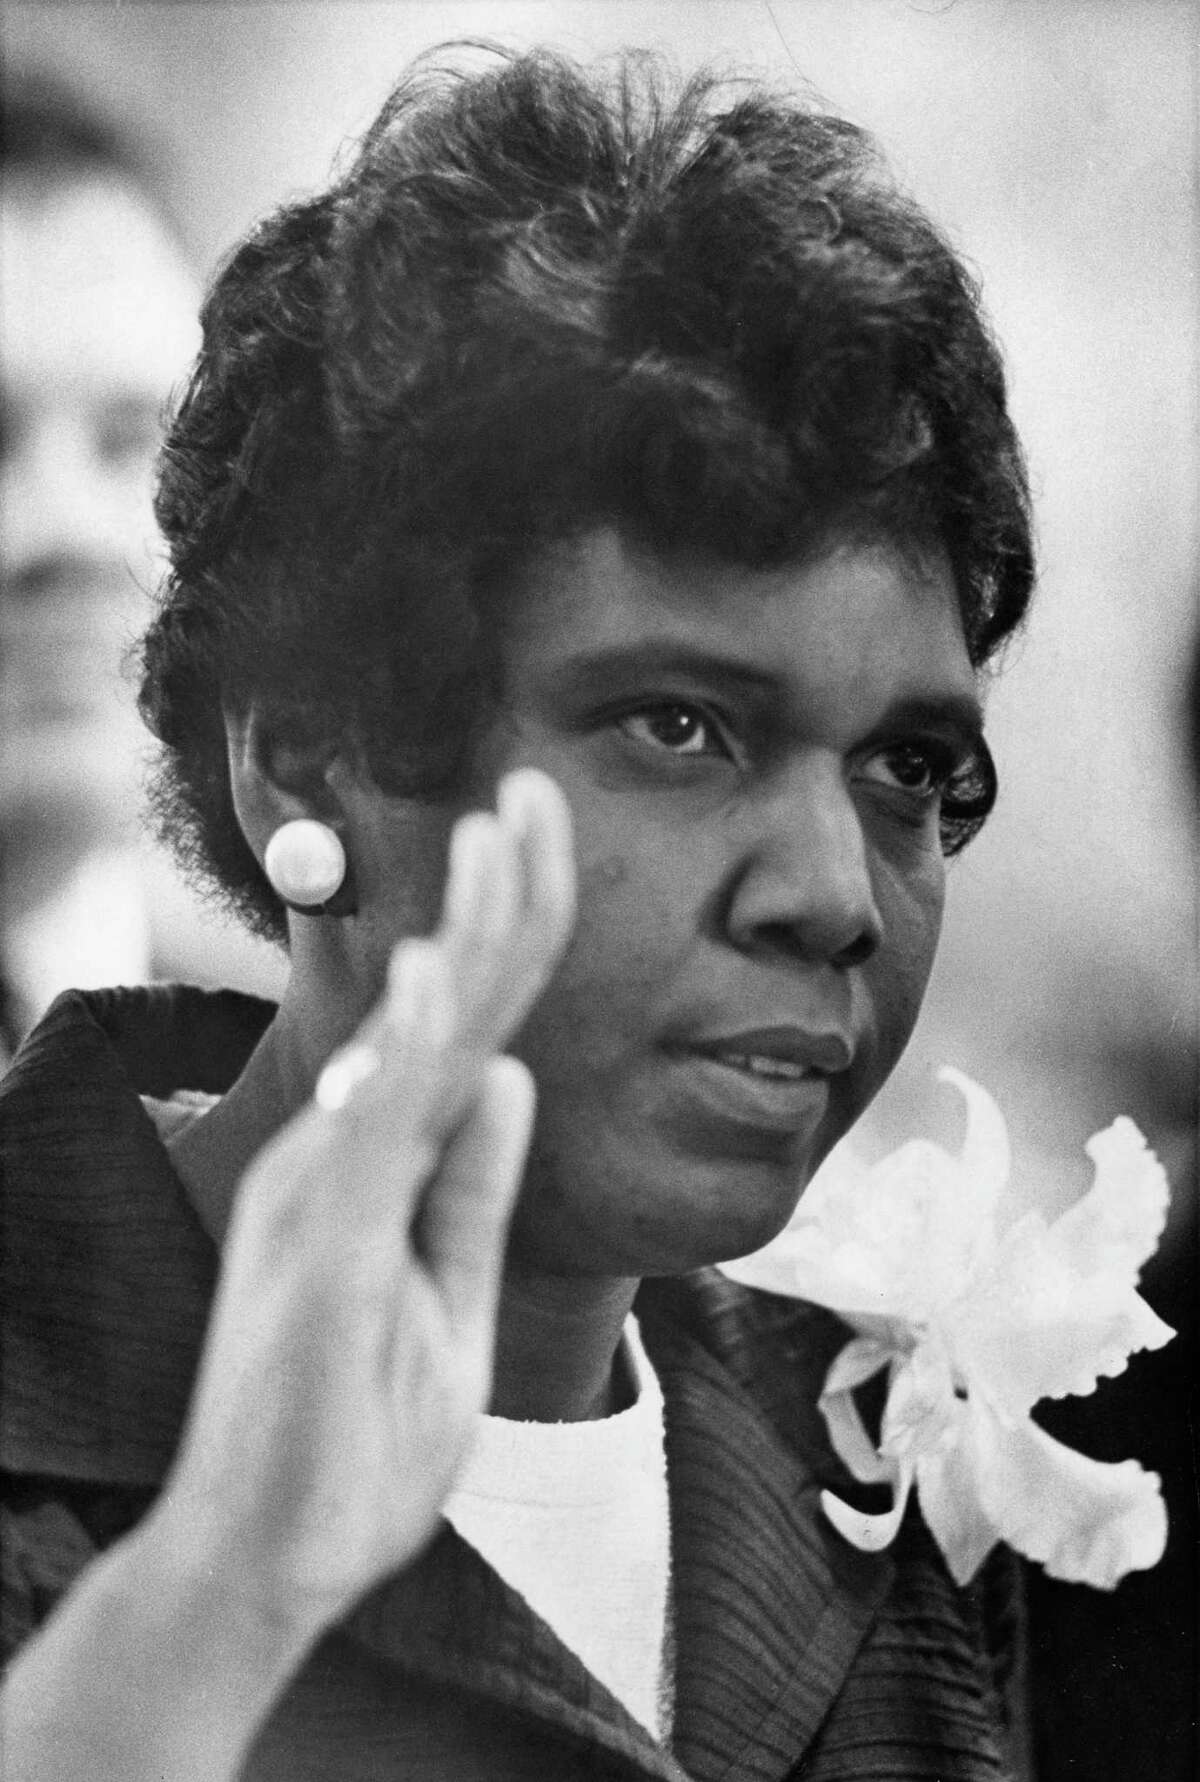 01/10/1967 - Barbara Jordan takes oath to become first African American Texas state senator since 1883 and the first black woman to serve in the Texas Senate.